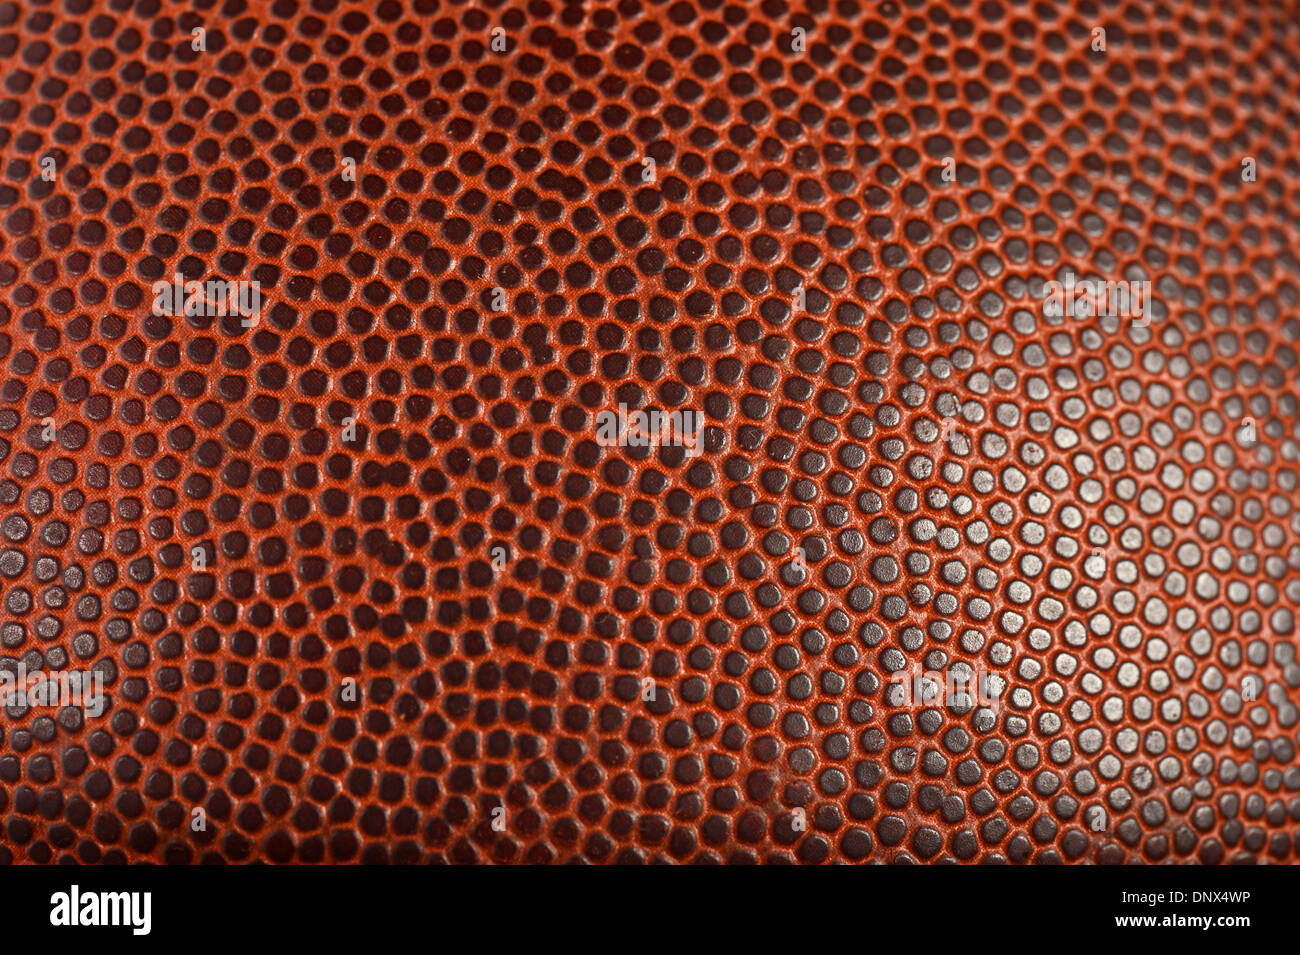 Leather skin macro view of football or basketball Stock Photo